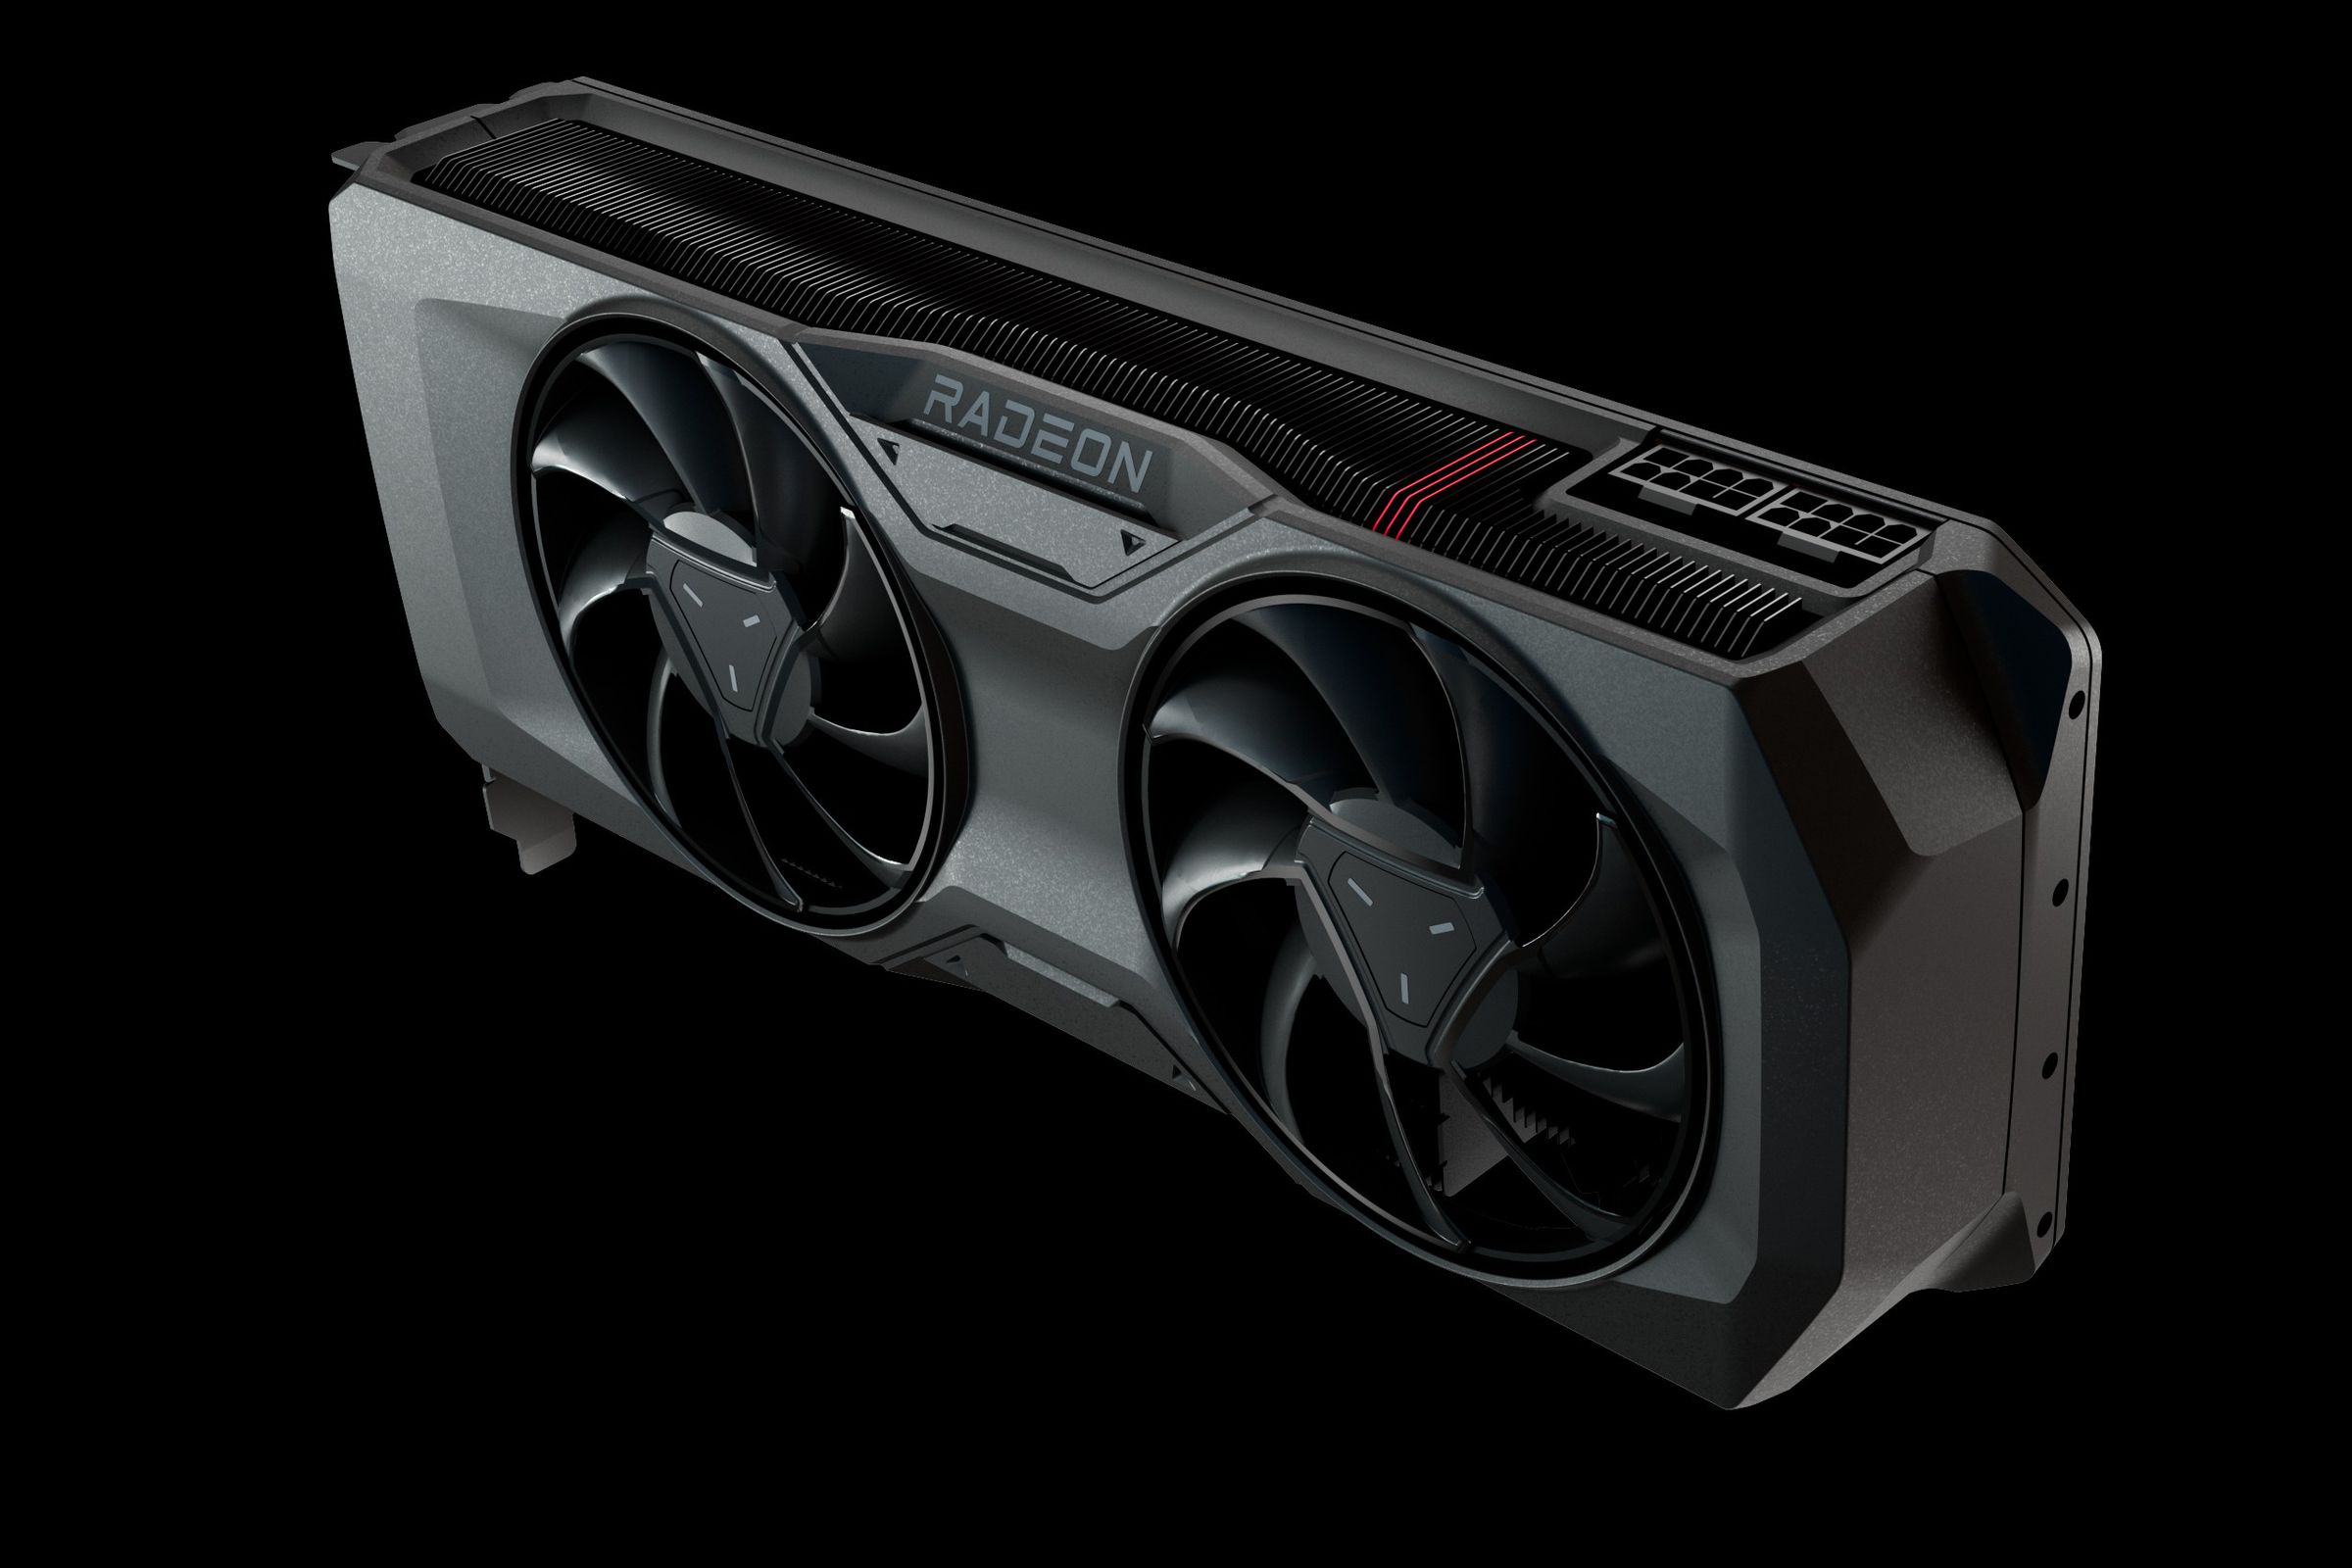 The AMD Radeon RX 7800 XT reference design. The lesser 7700 XT won’t be available with this AMD cooler.